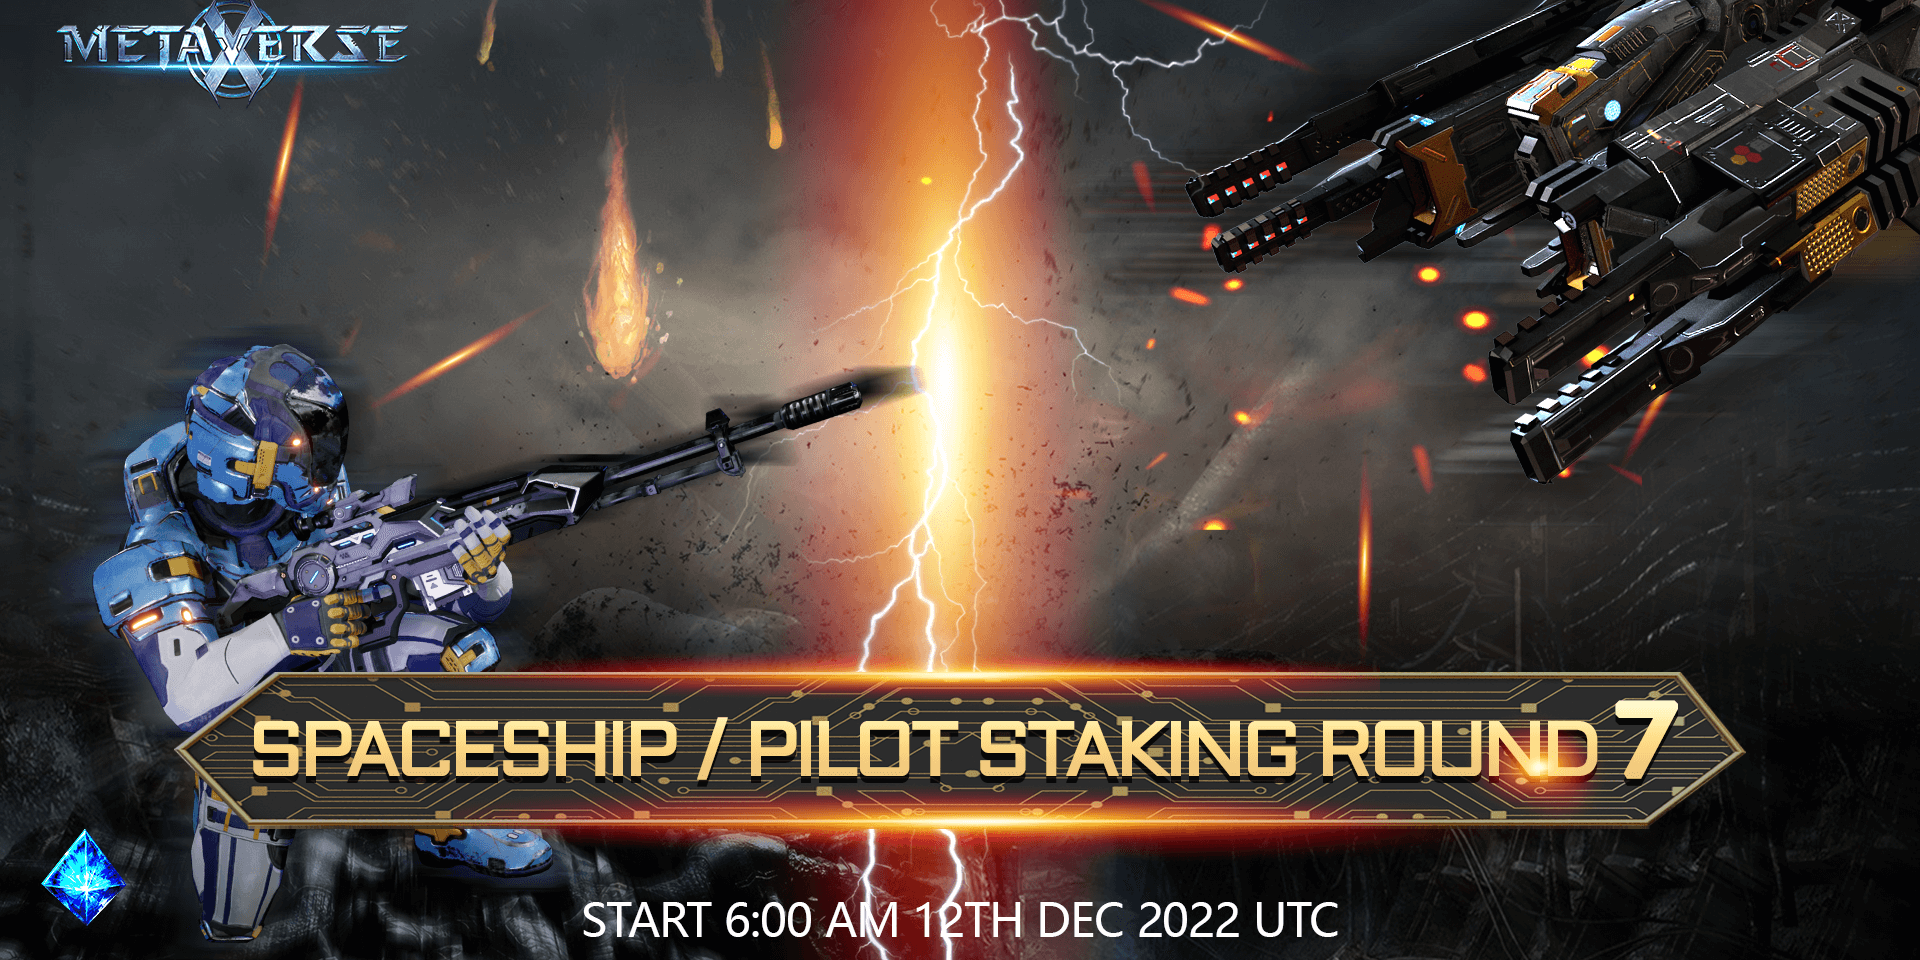 Staking Round 12 for your Pilots & Space Battleships is here, by  X-Metaverse